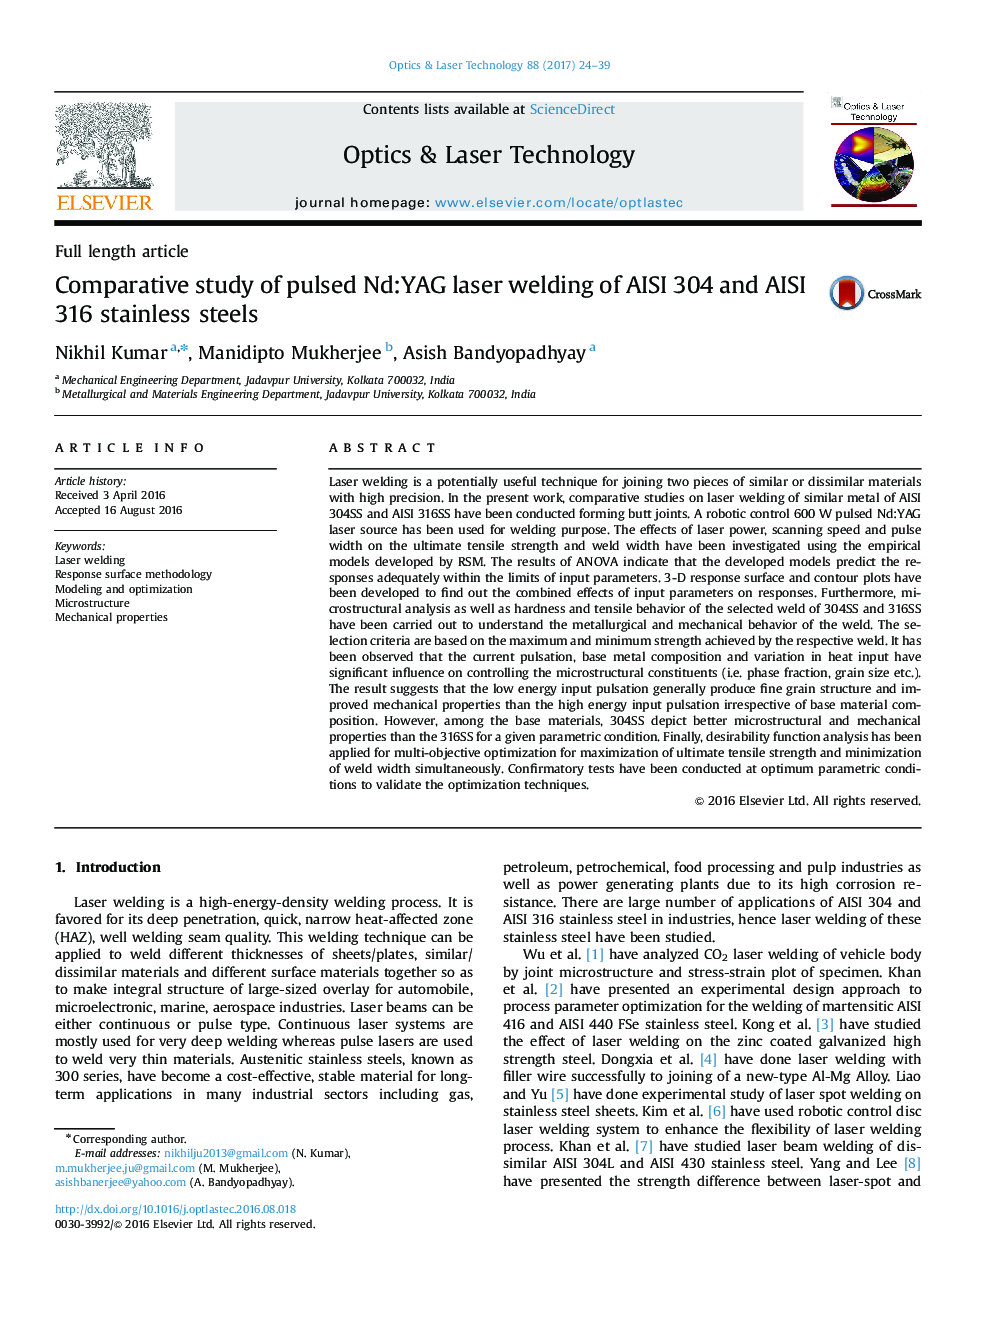 Comparative study of pulsed Nd:YAG laser welding of AISI 304 and AISI 316 stainless steels